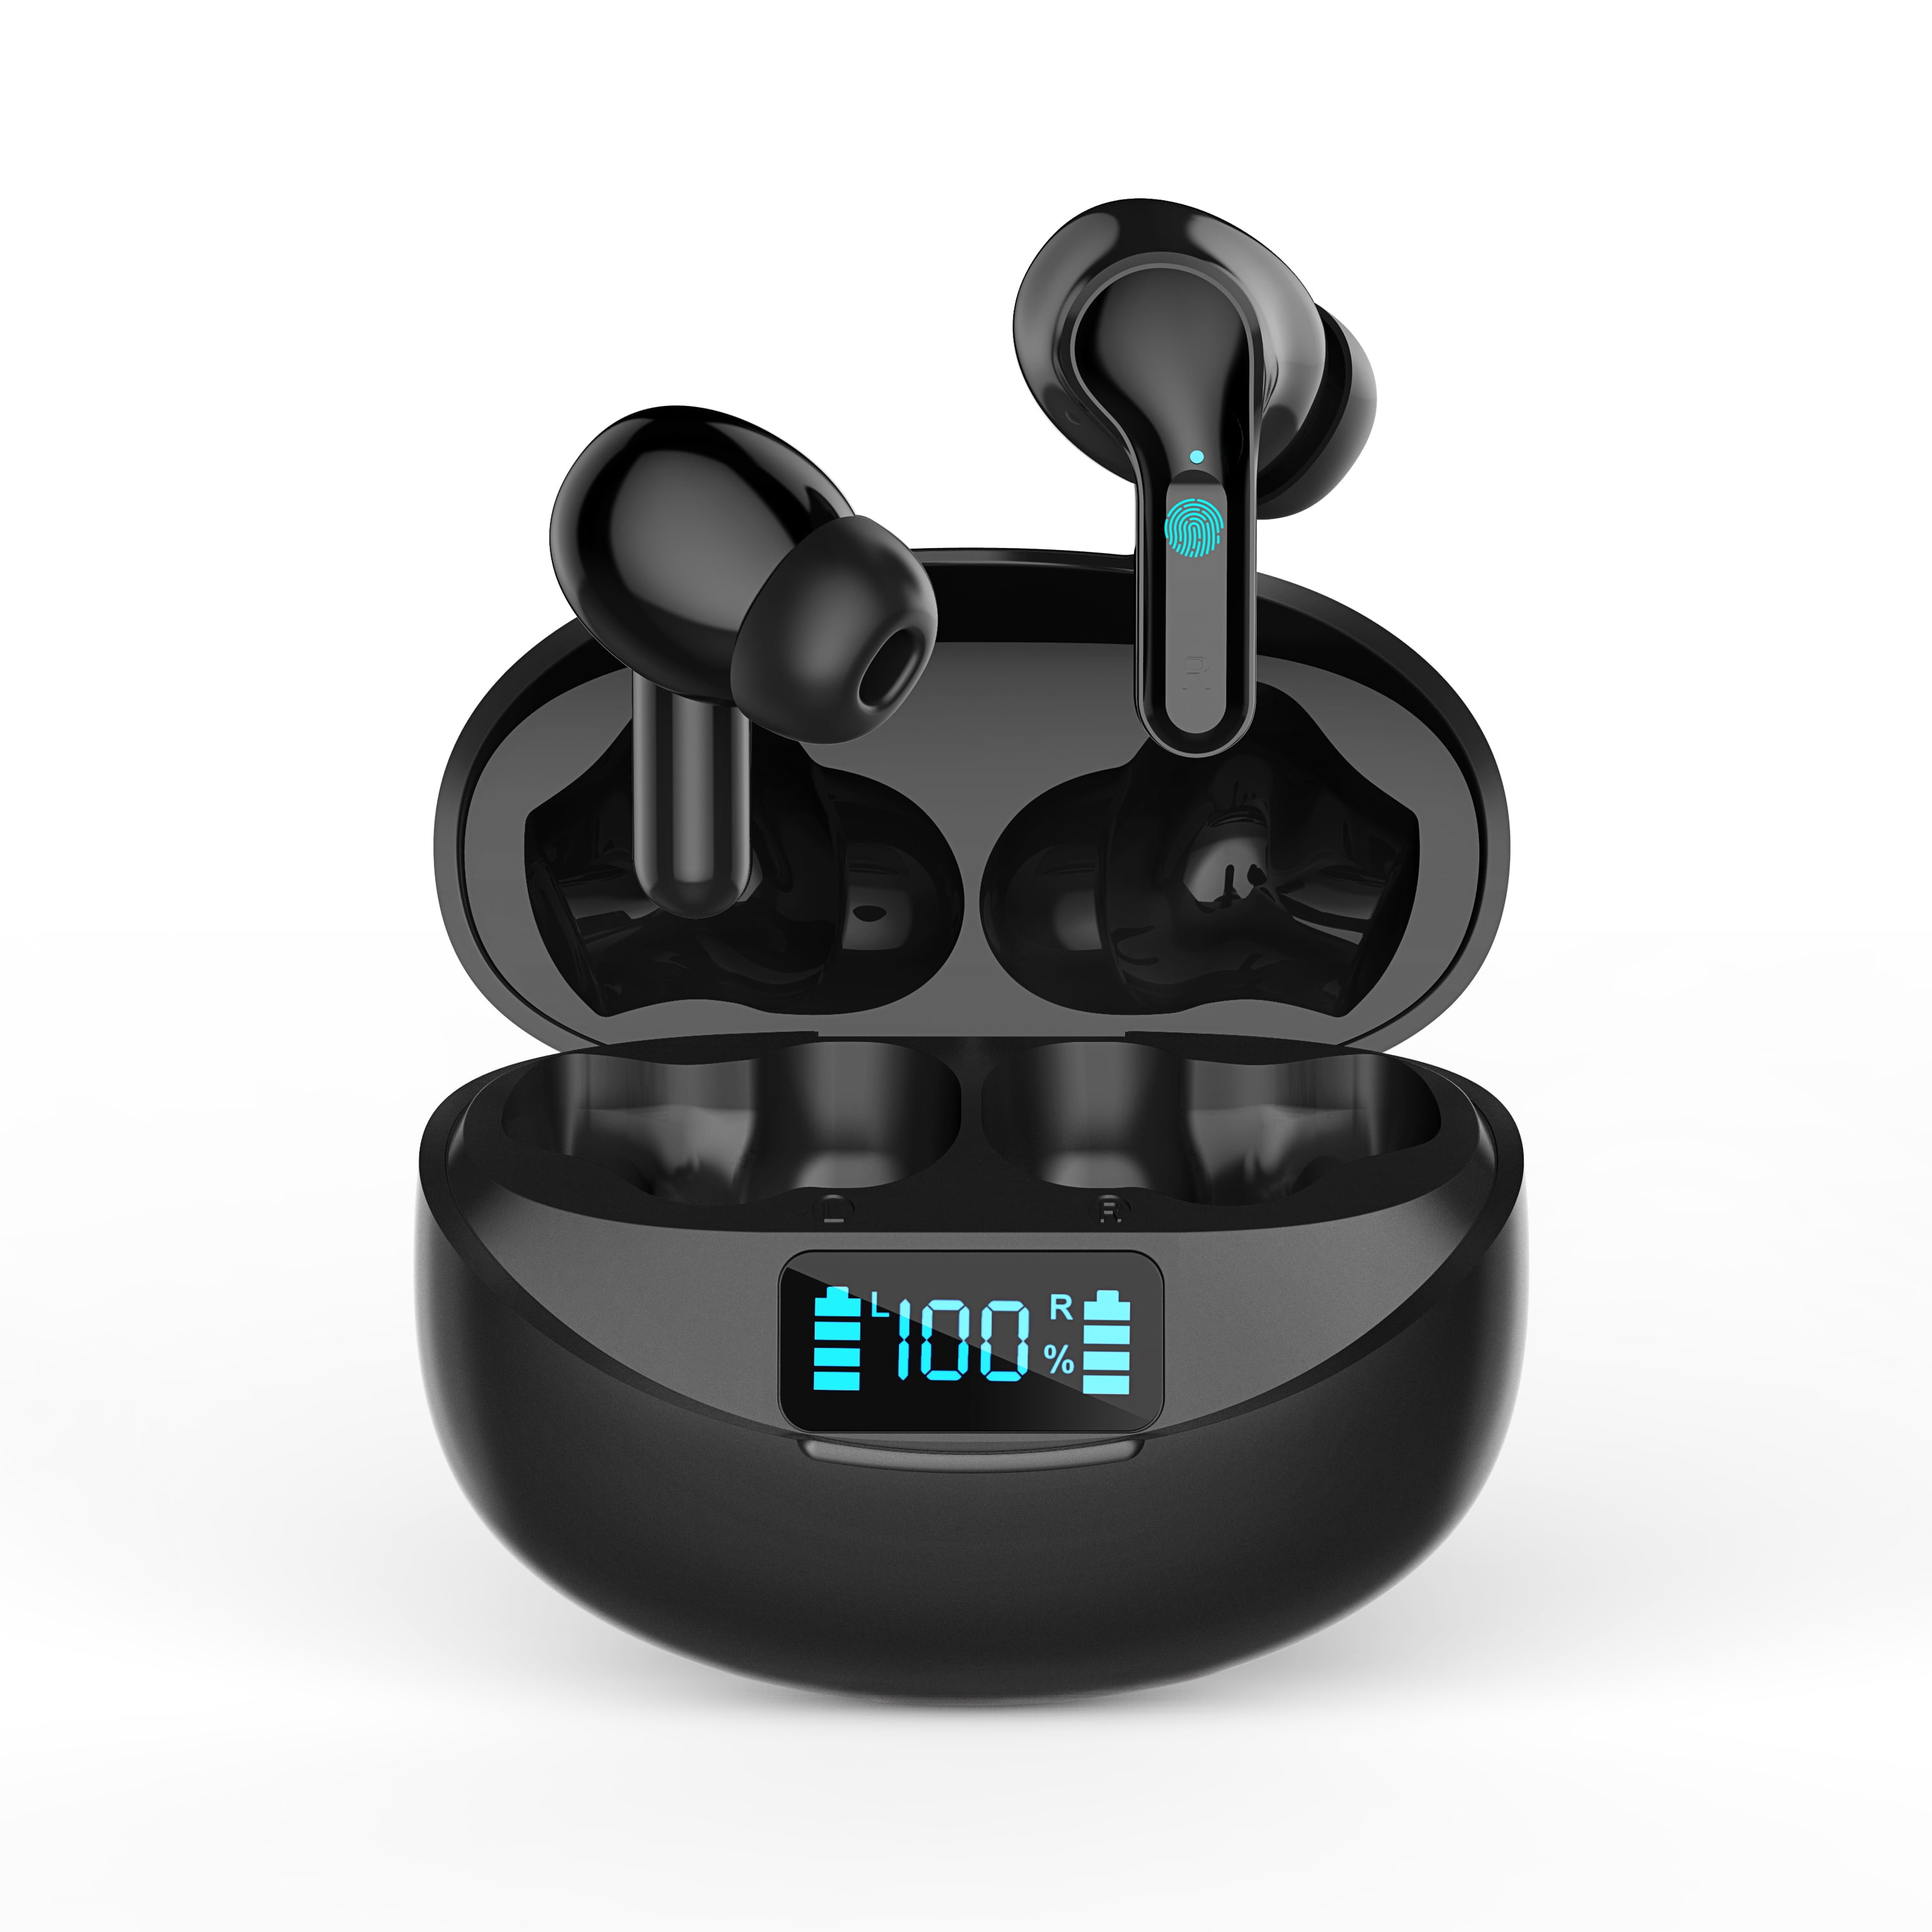 Xiaomi New 2021 Redmi Buds 3 Pro Airdots In-Ear Earbuds, 35dB Smart Noise  Cancellation, Dual-device connectivity, Wireless charging, 28hour battery,  Dual transparency mode, Bluetooth 5.2, Glacier Gray : Electronics 